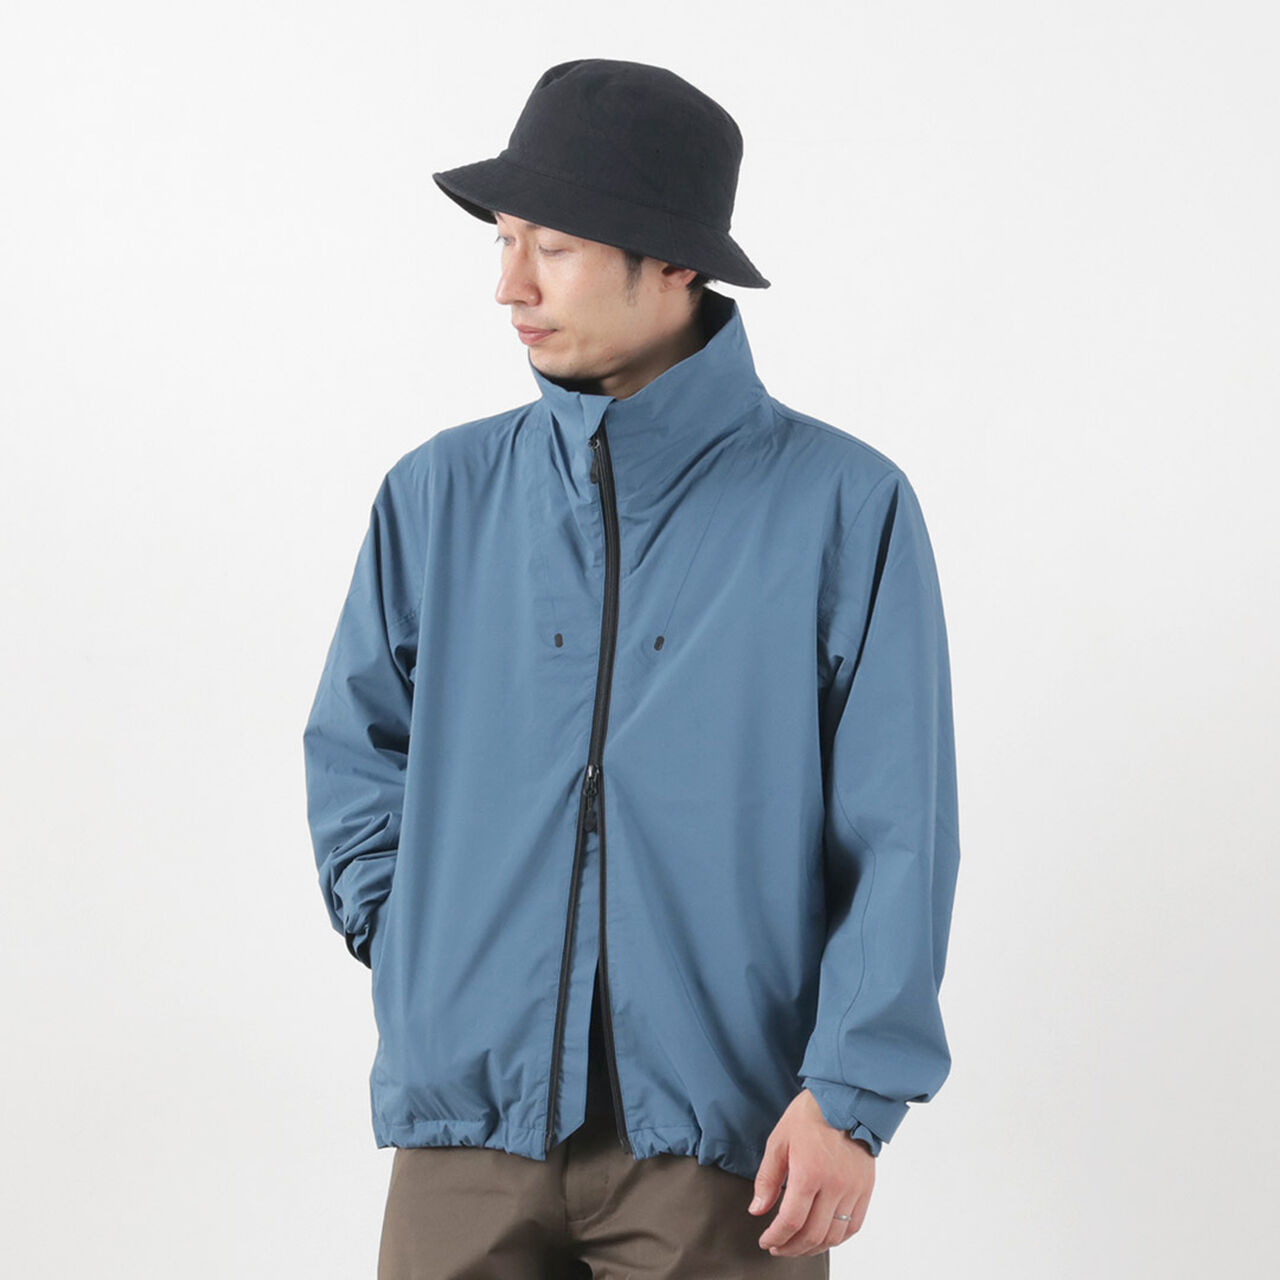 Stand Collar Shell Jacket,Blue, large image number 0